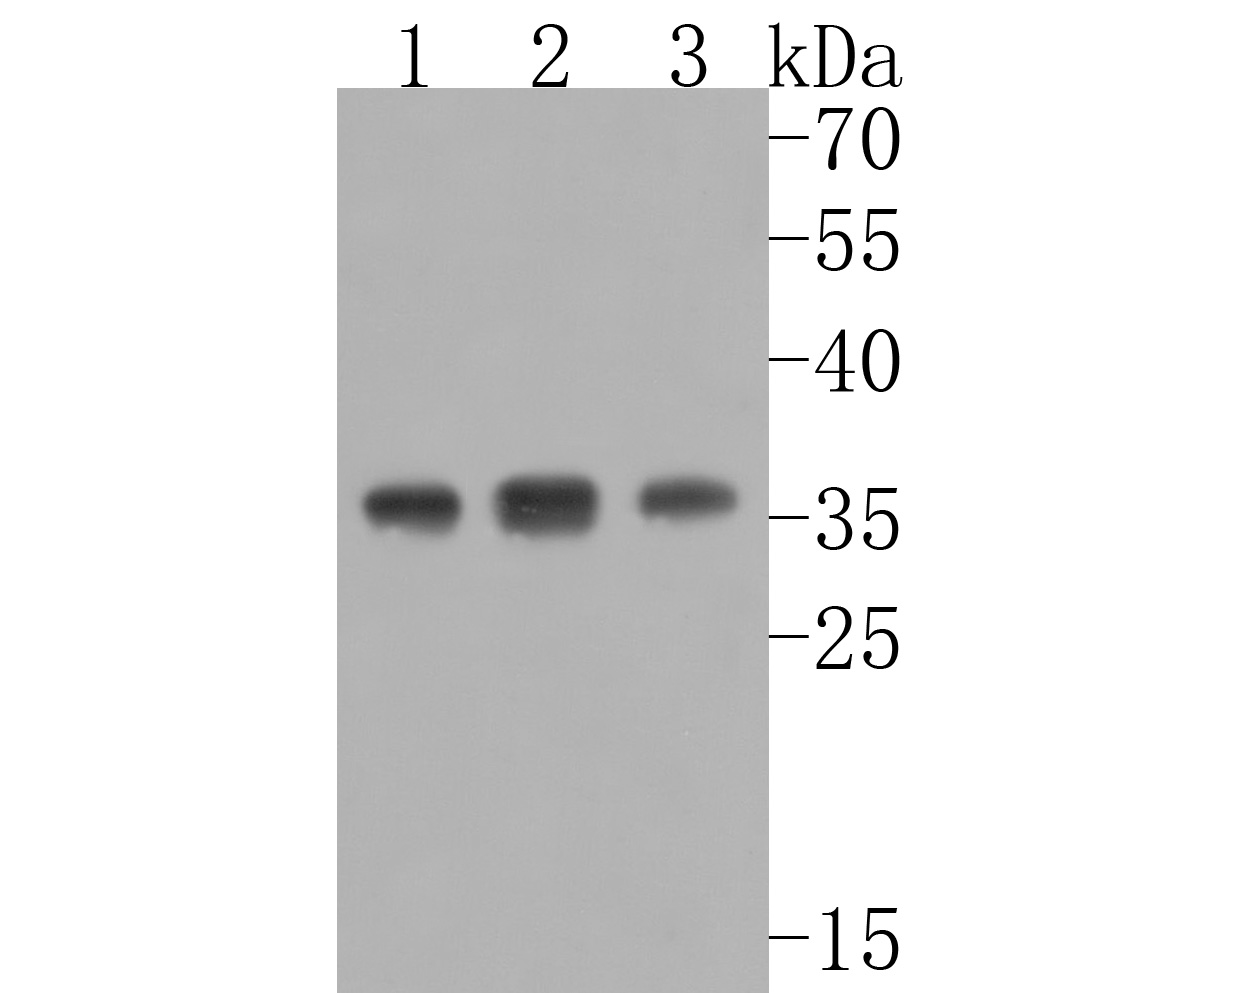 Western blot analysis of MED4 on different lysates. Proteins were transferred to a PVDF membrane and blocked with 5% BSA in PBS for 1 hour at room temperature. The primary antibody (HA720007, 1/500) was used in 5% BSA at room temperature for 2 hours. Goat Anti-Rabbit IgG - HRP Secondary Antibody (HA1001) at 1:5,000 dilution was used for 1 hour at room temperature.<br />
Positive control: <br />
Lane 1: SH-SY5Y cell lysate<br />
Lane 2: Rat testis tissue lysate<br />
Lane 3: Mouse thymus tissue lysate